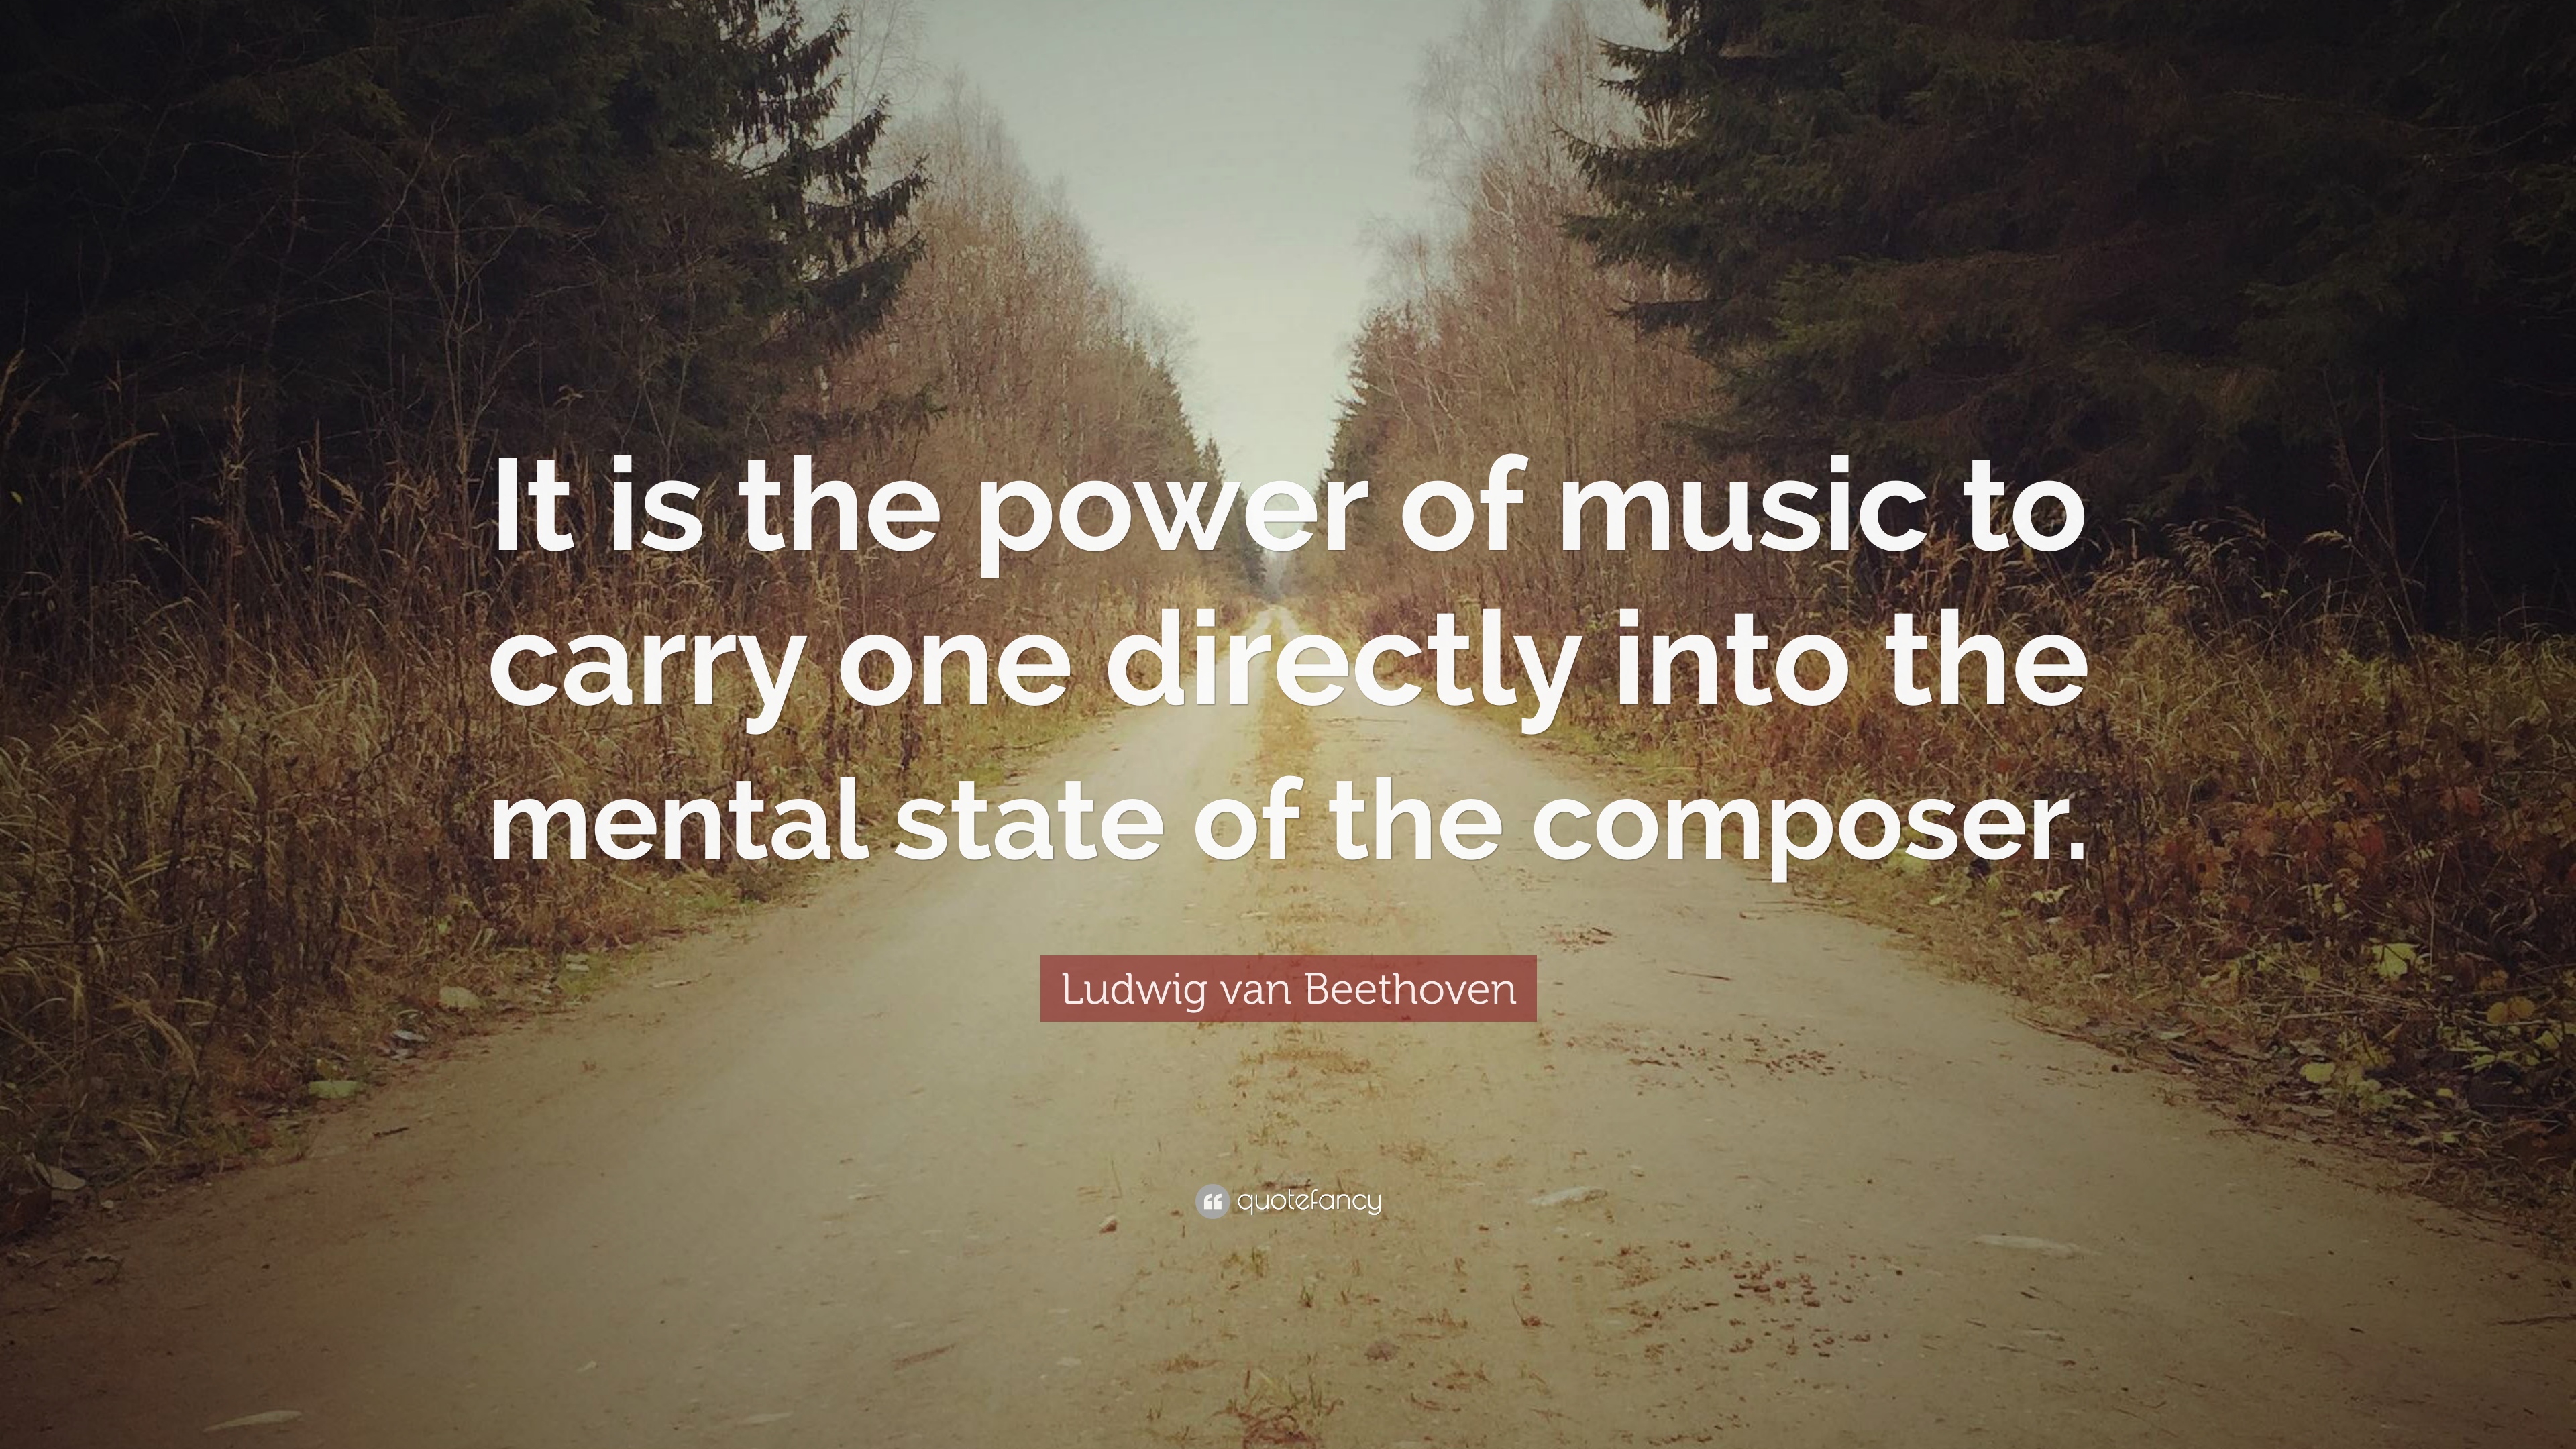 Ludwig van Beethoven Quote: “It is the power of music to carry one